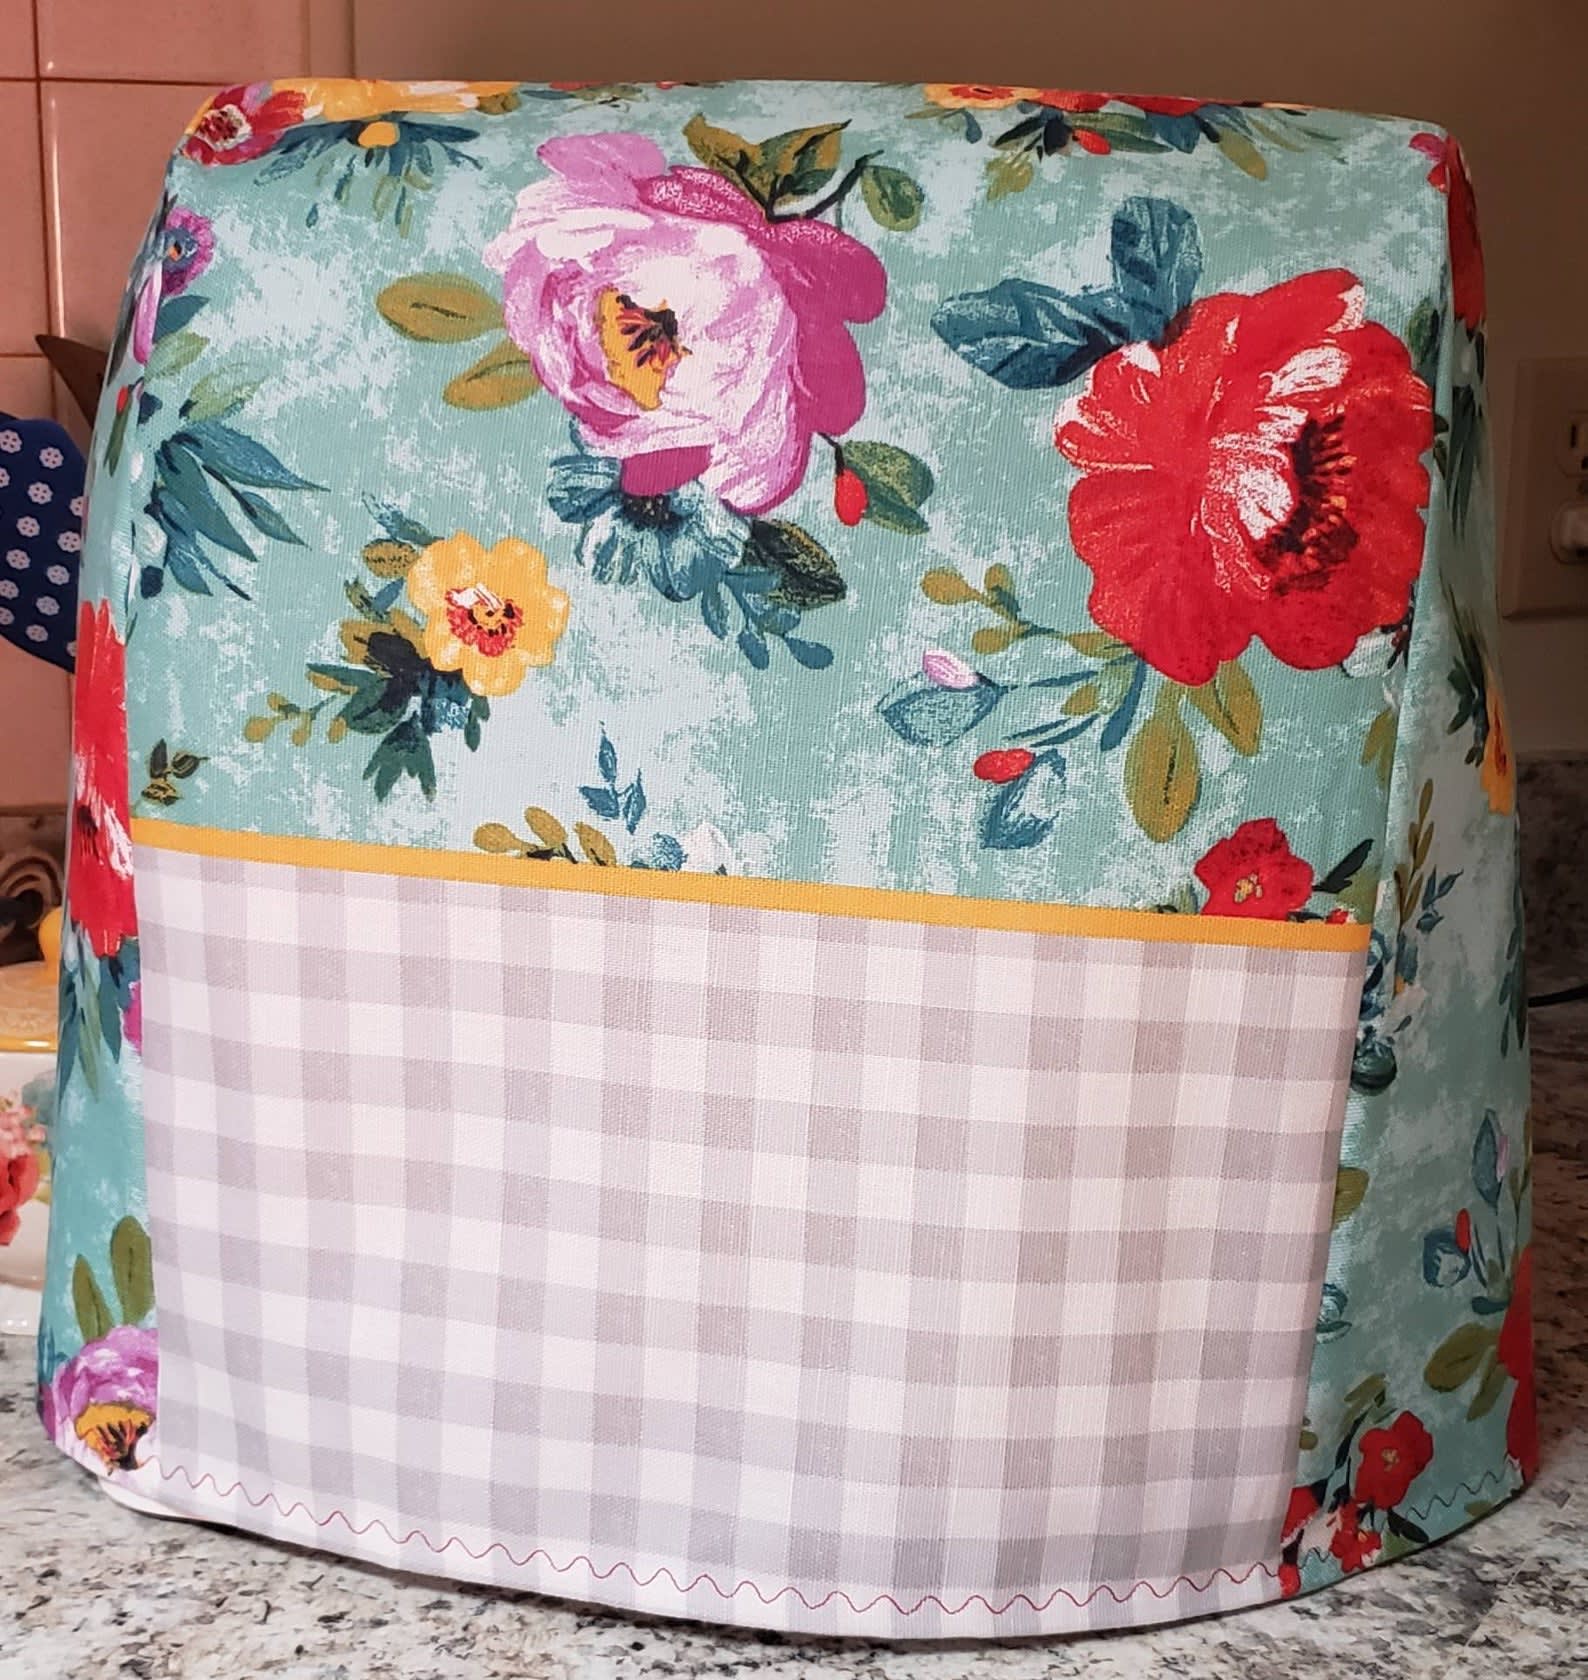 Handmade KitchenAid Stand Mixer Cover  Kitchen aid mixer cover pattern,  Sewing machine cover, Mixer cover